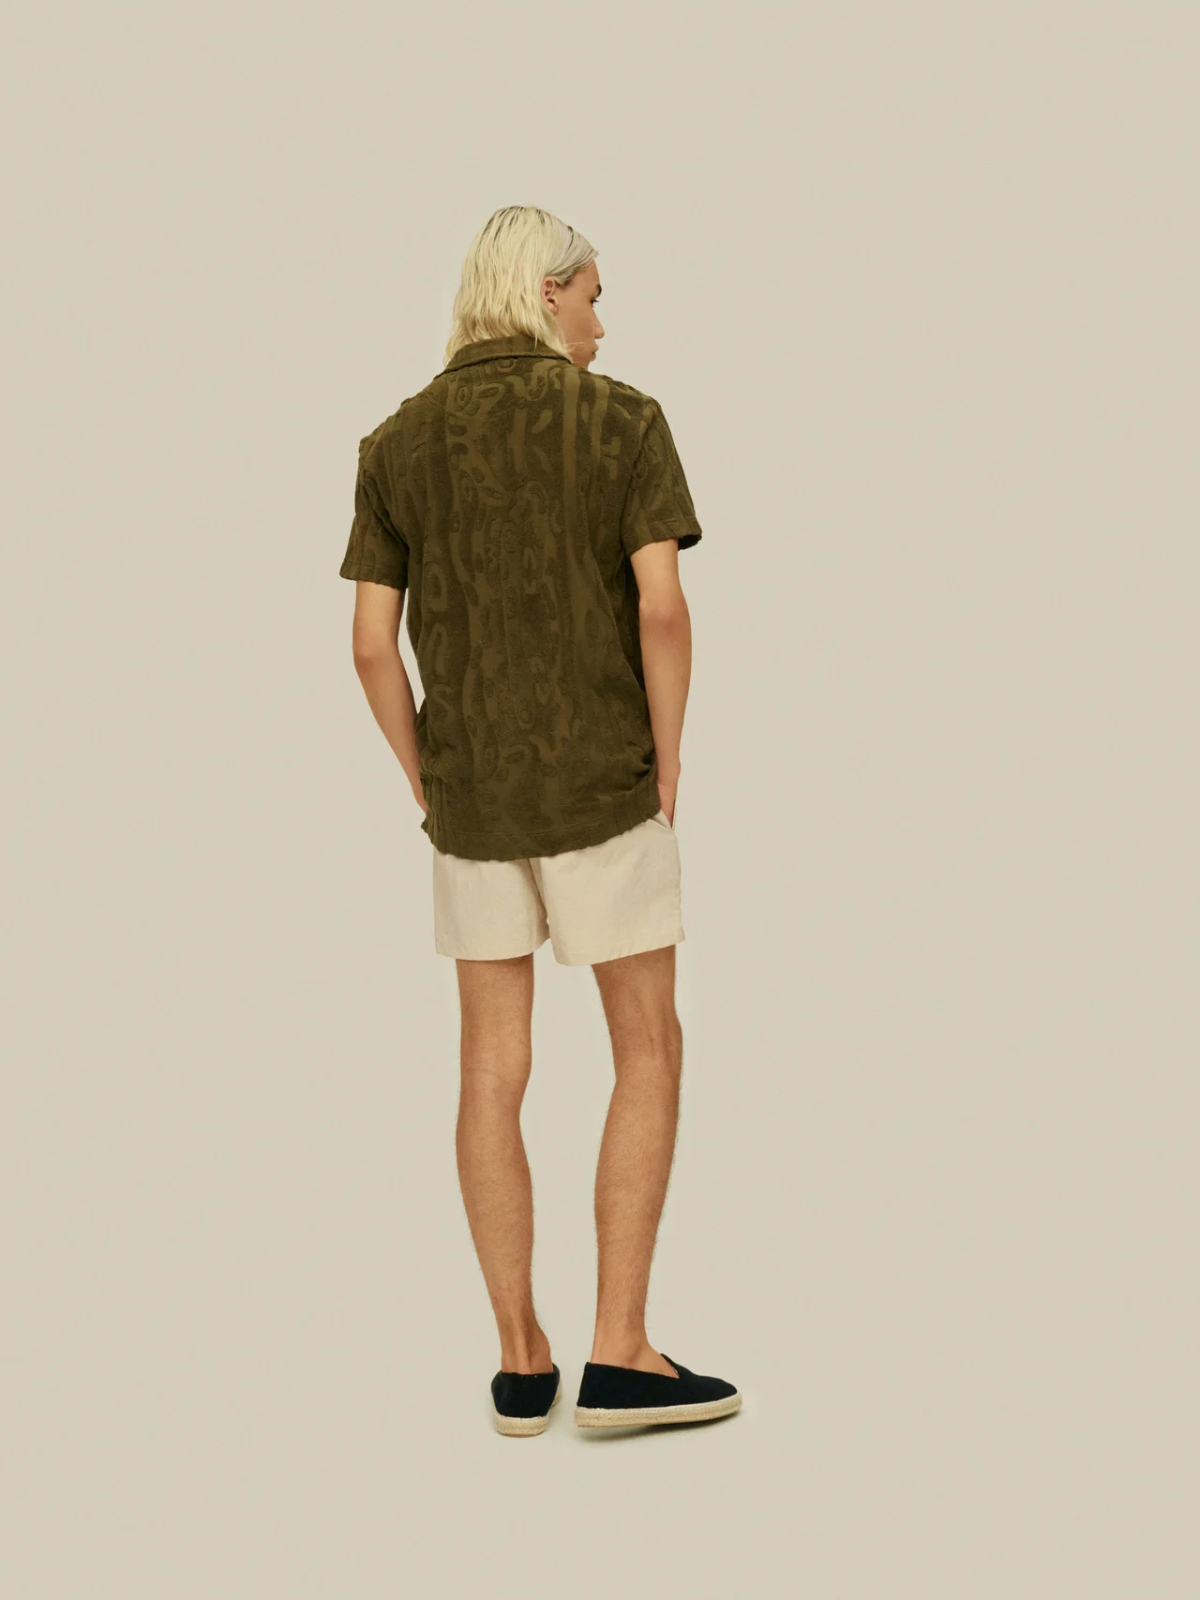 oas jiggle terry polo olive green ss short sleeve cotton polyester blend kempt athens ga georgia men's clothing store